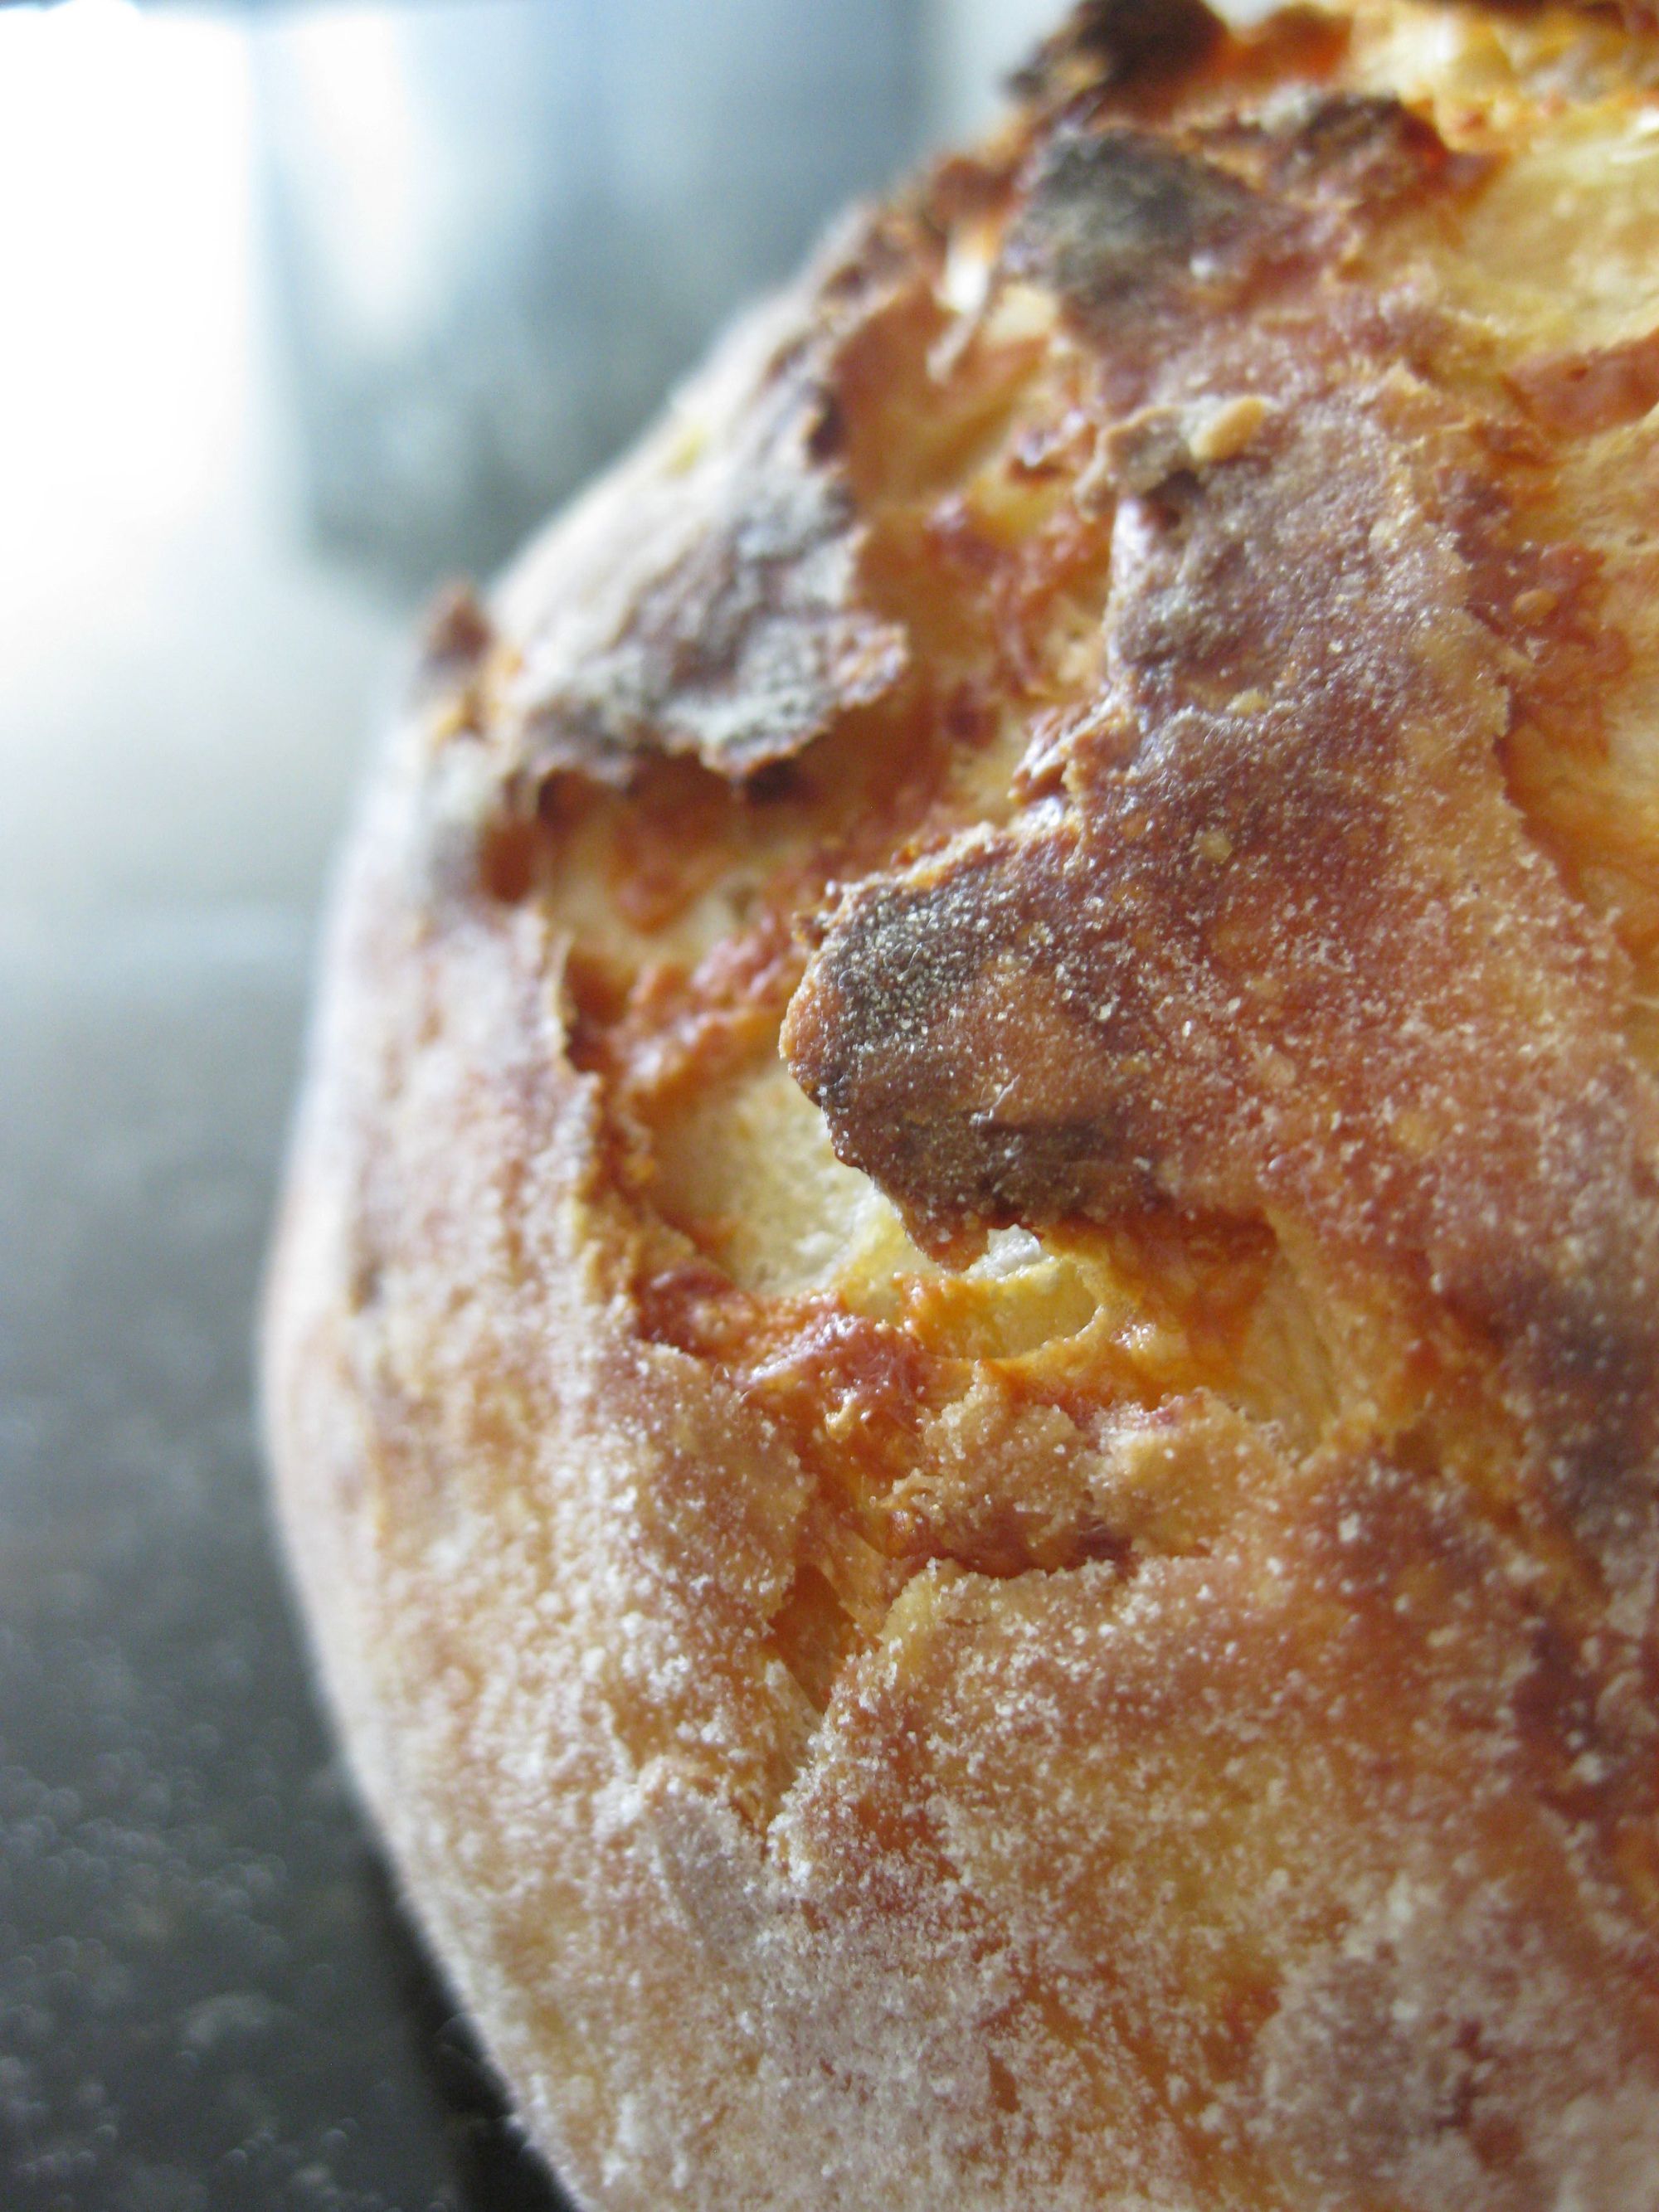 Crusty bread, Easiest bread recipe ever! Make the night before, let it rise over